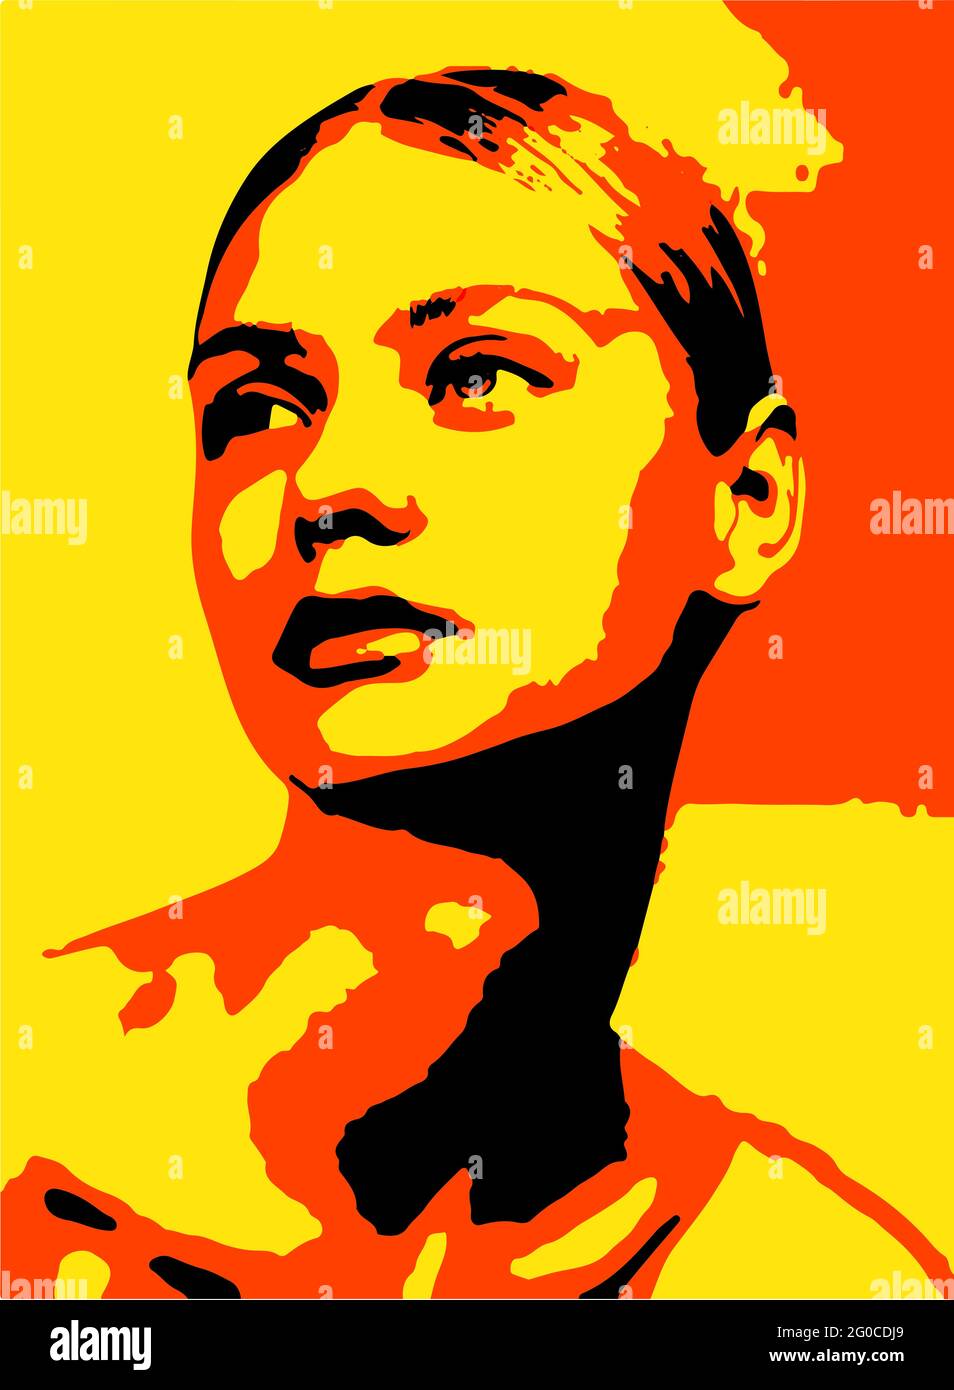 Alamy wall Poster - images photography stock hi-res and